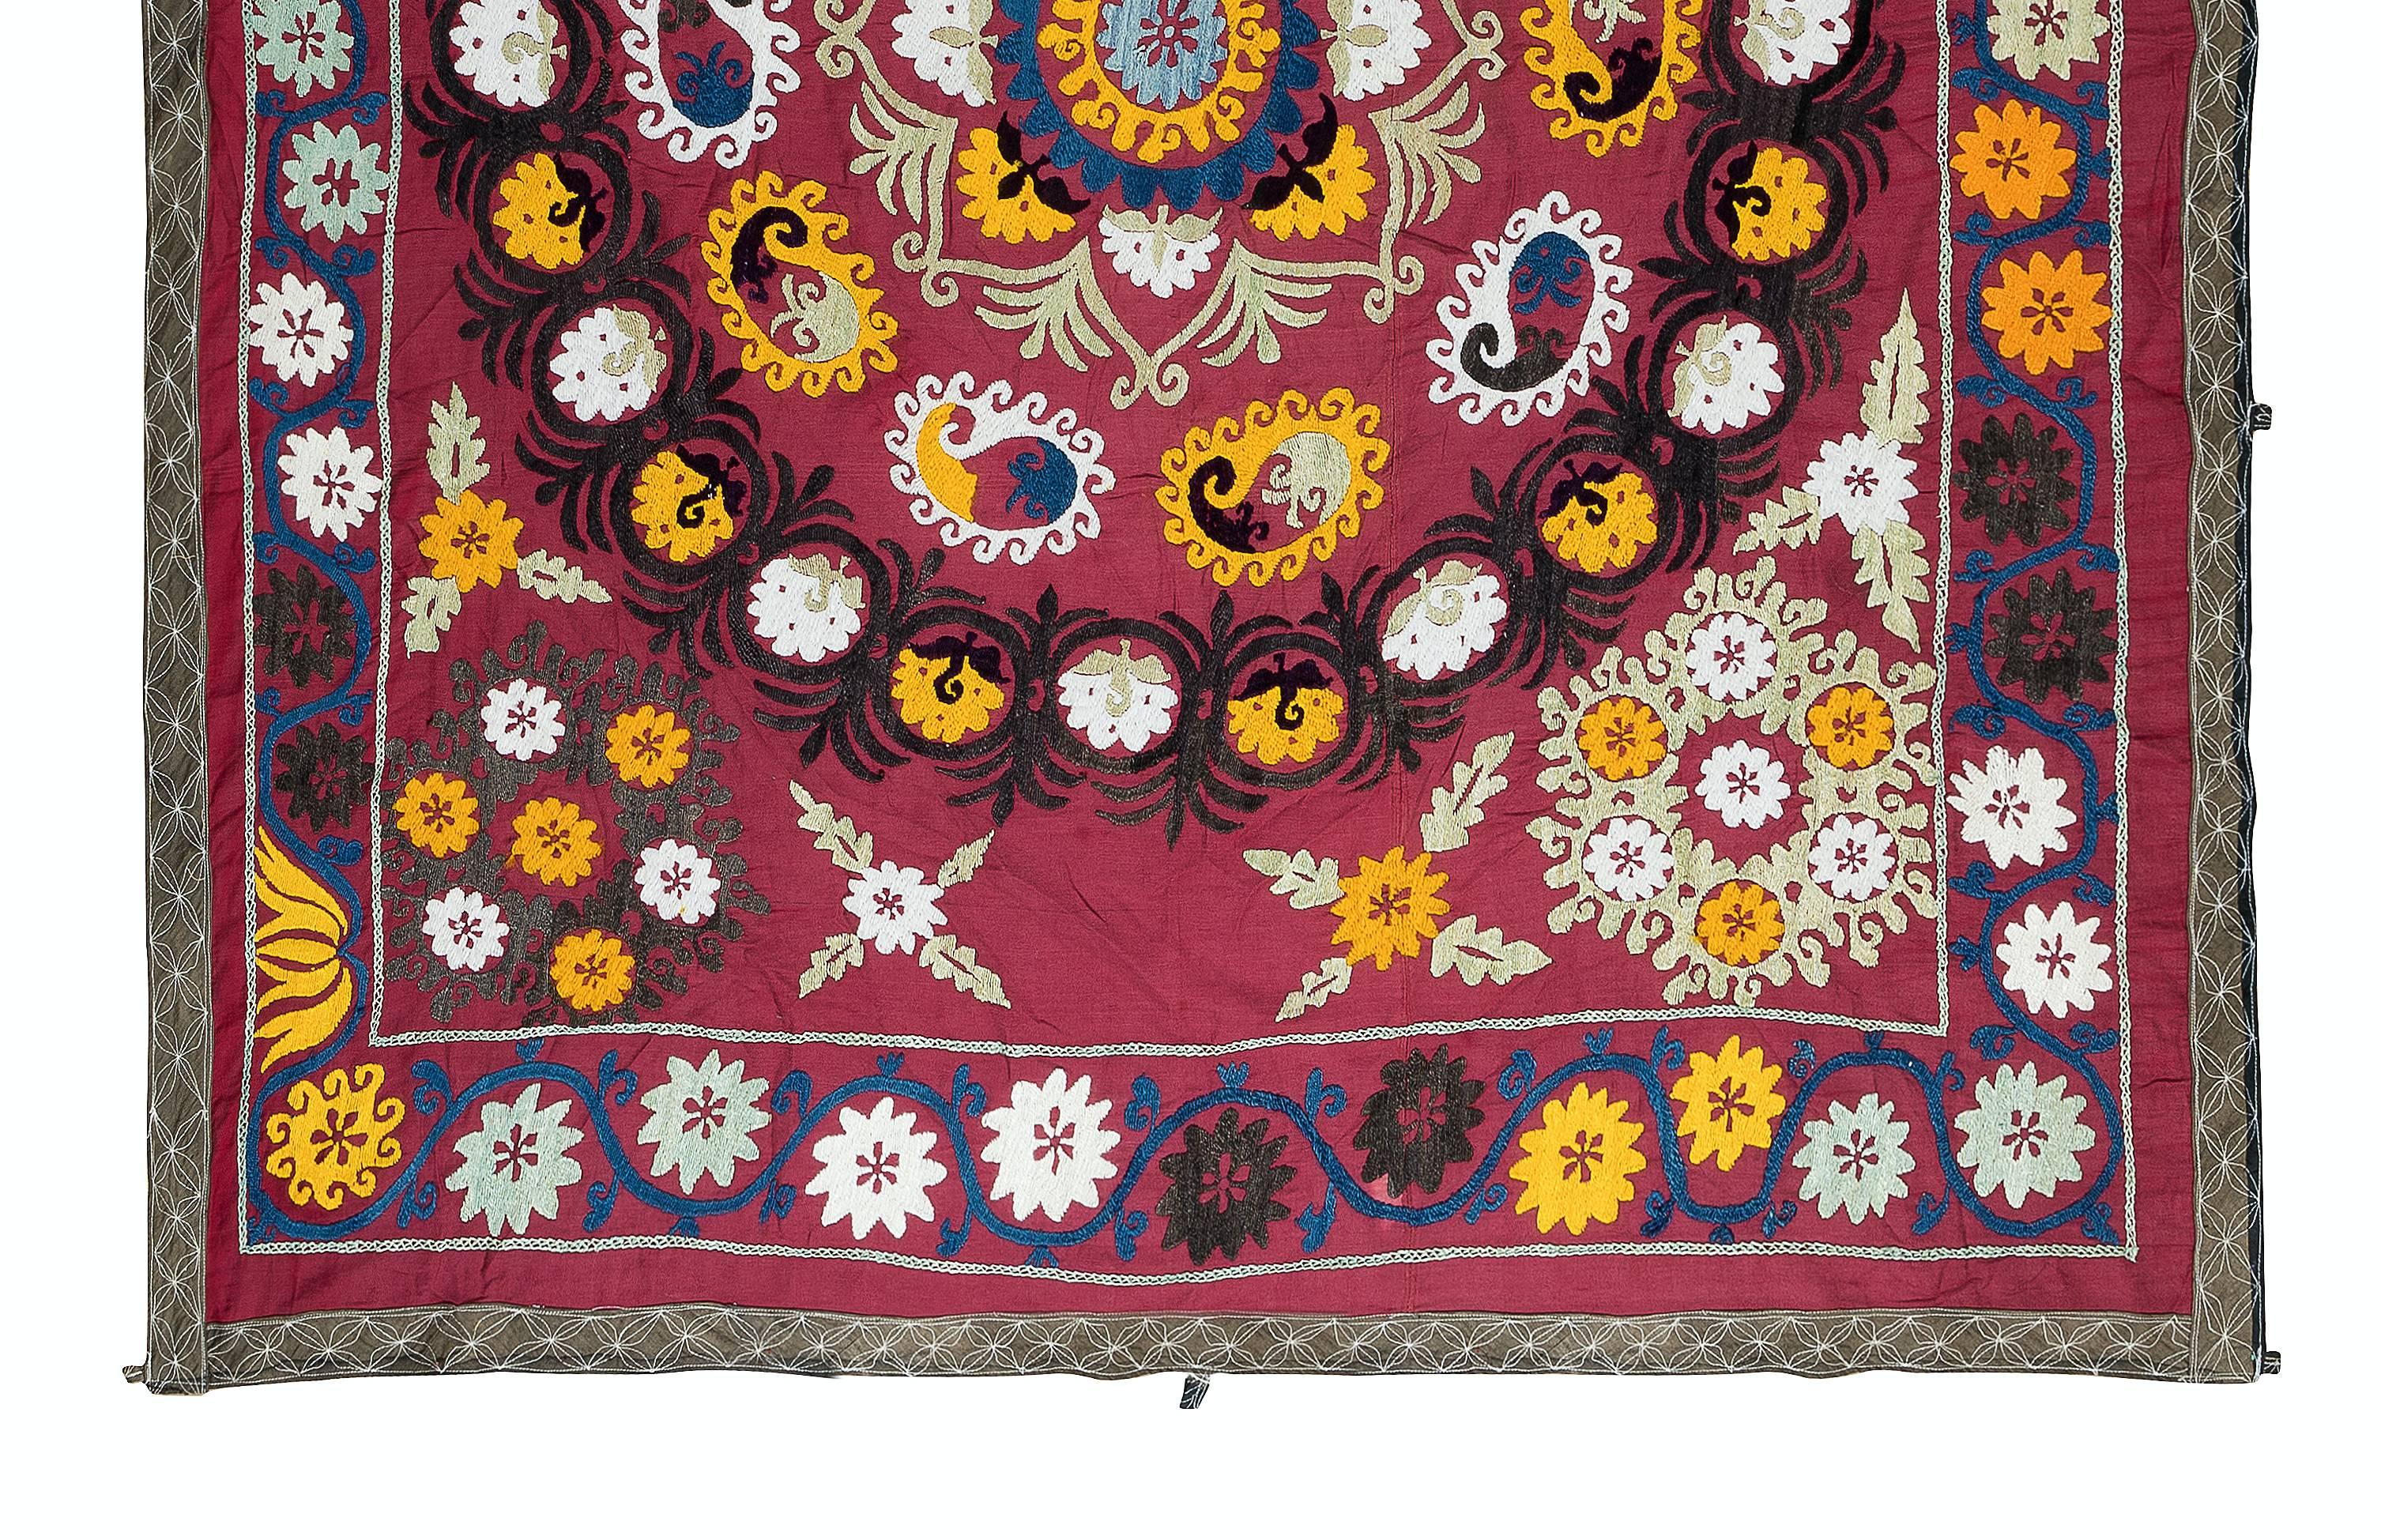 Suzani 5.3x6.2 Ft Vintage Hand Embroidered Bed Cover, Uzbek Silk & Cotton Wall Hanging For Sale